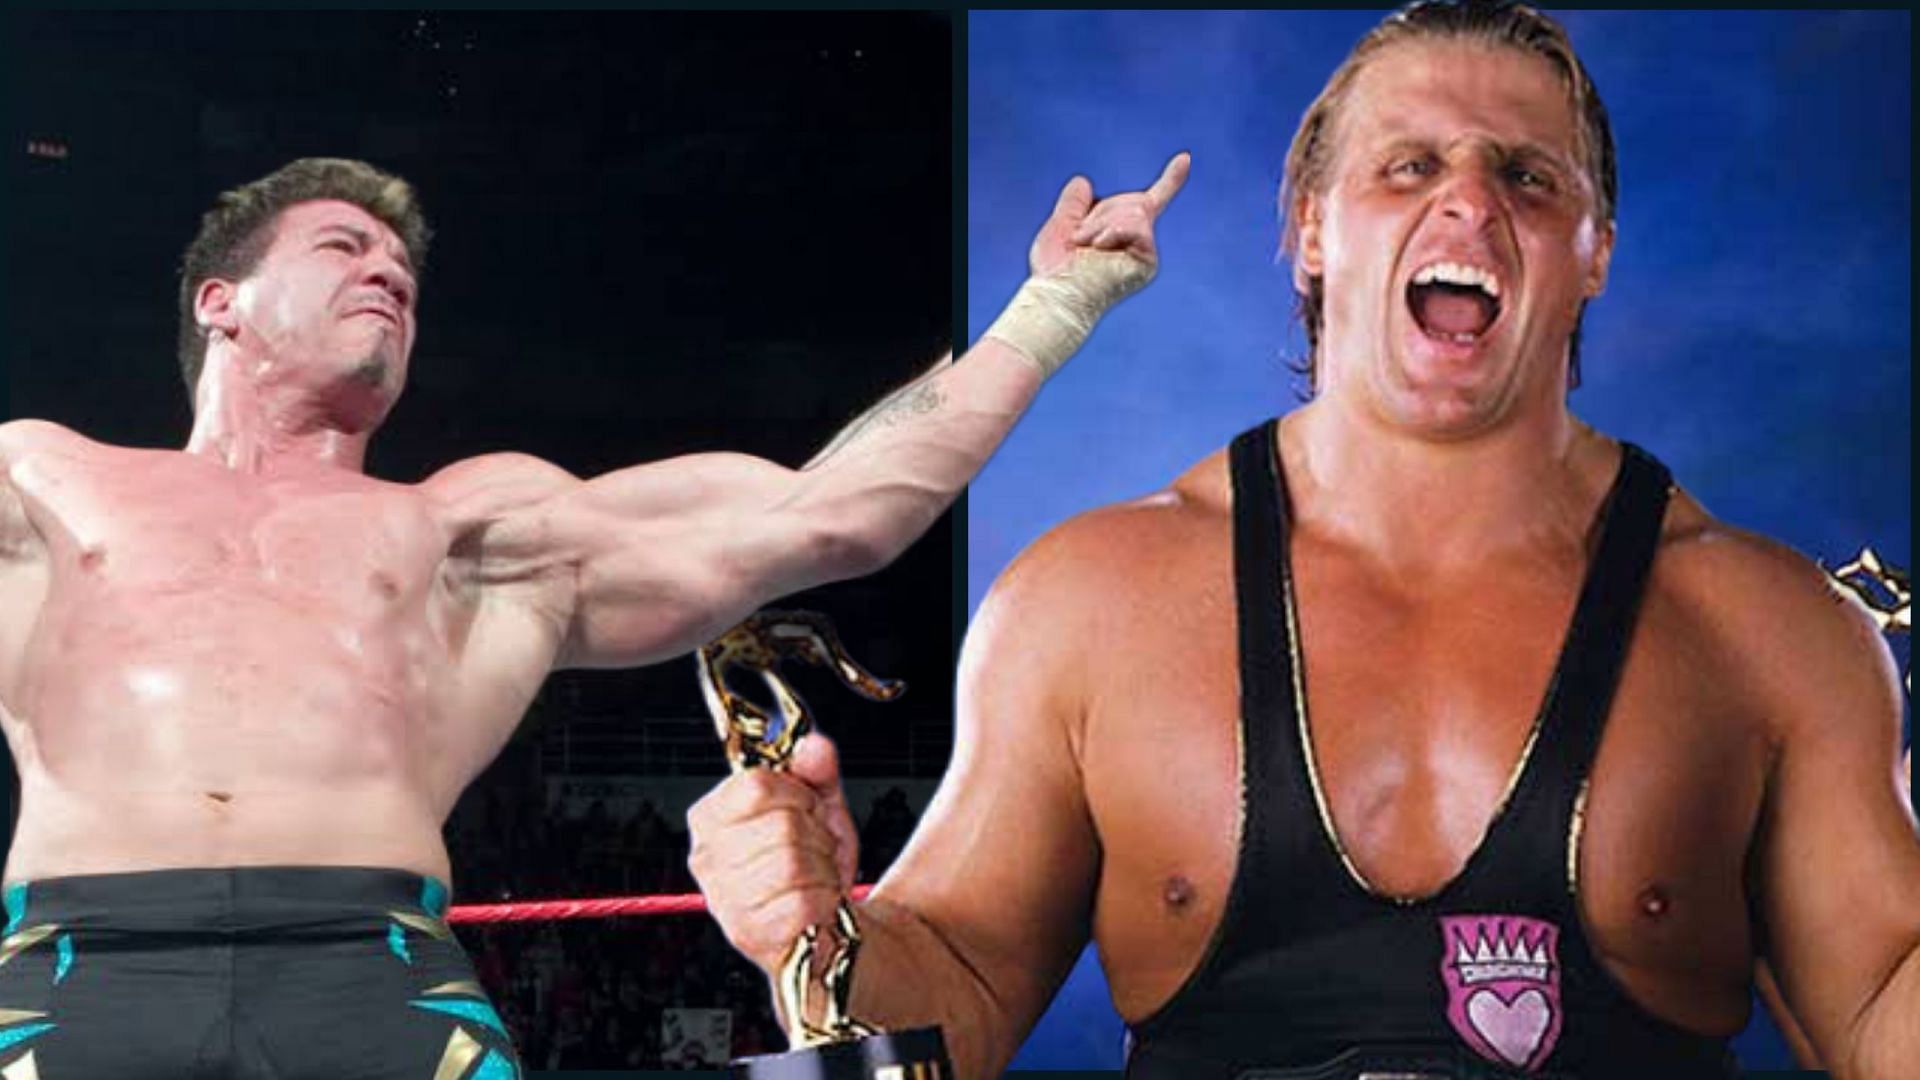 Eddie Guerrero and Owen Hart were exceptionally talented stars who passed away too early.